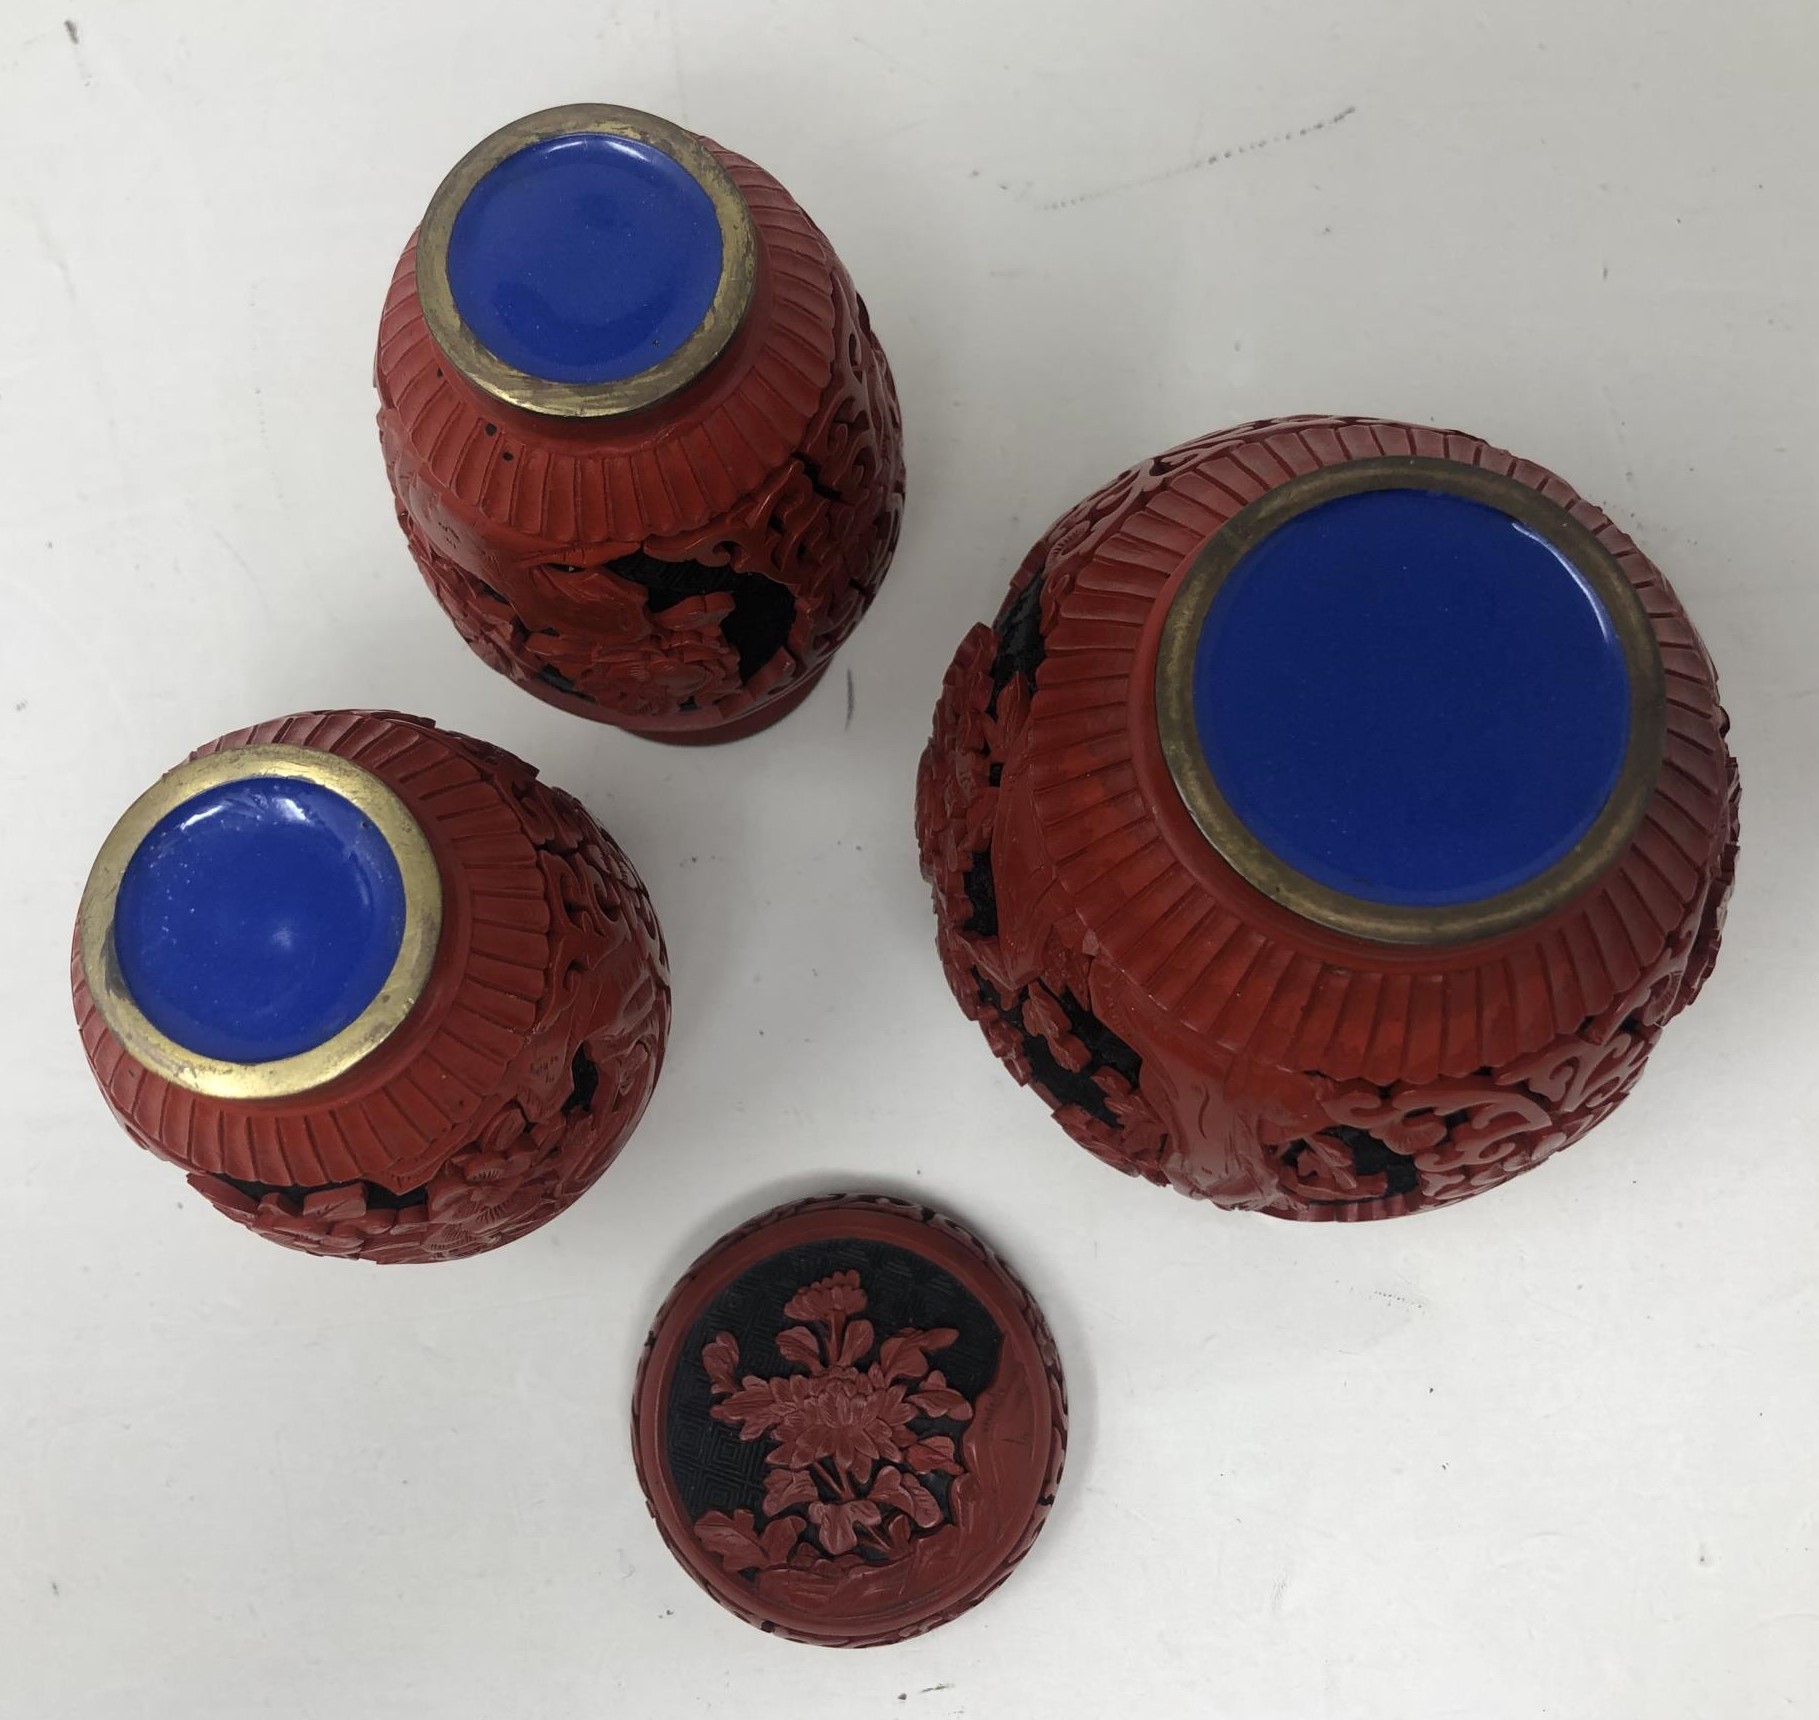 A pair of Chinese cinnabar lacquer vases, 10 cm high, and a matching jar and cover, 10.5 cm high (3) - Image 4 of 4